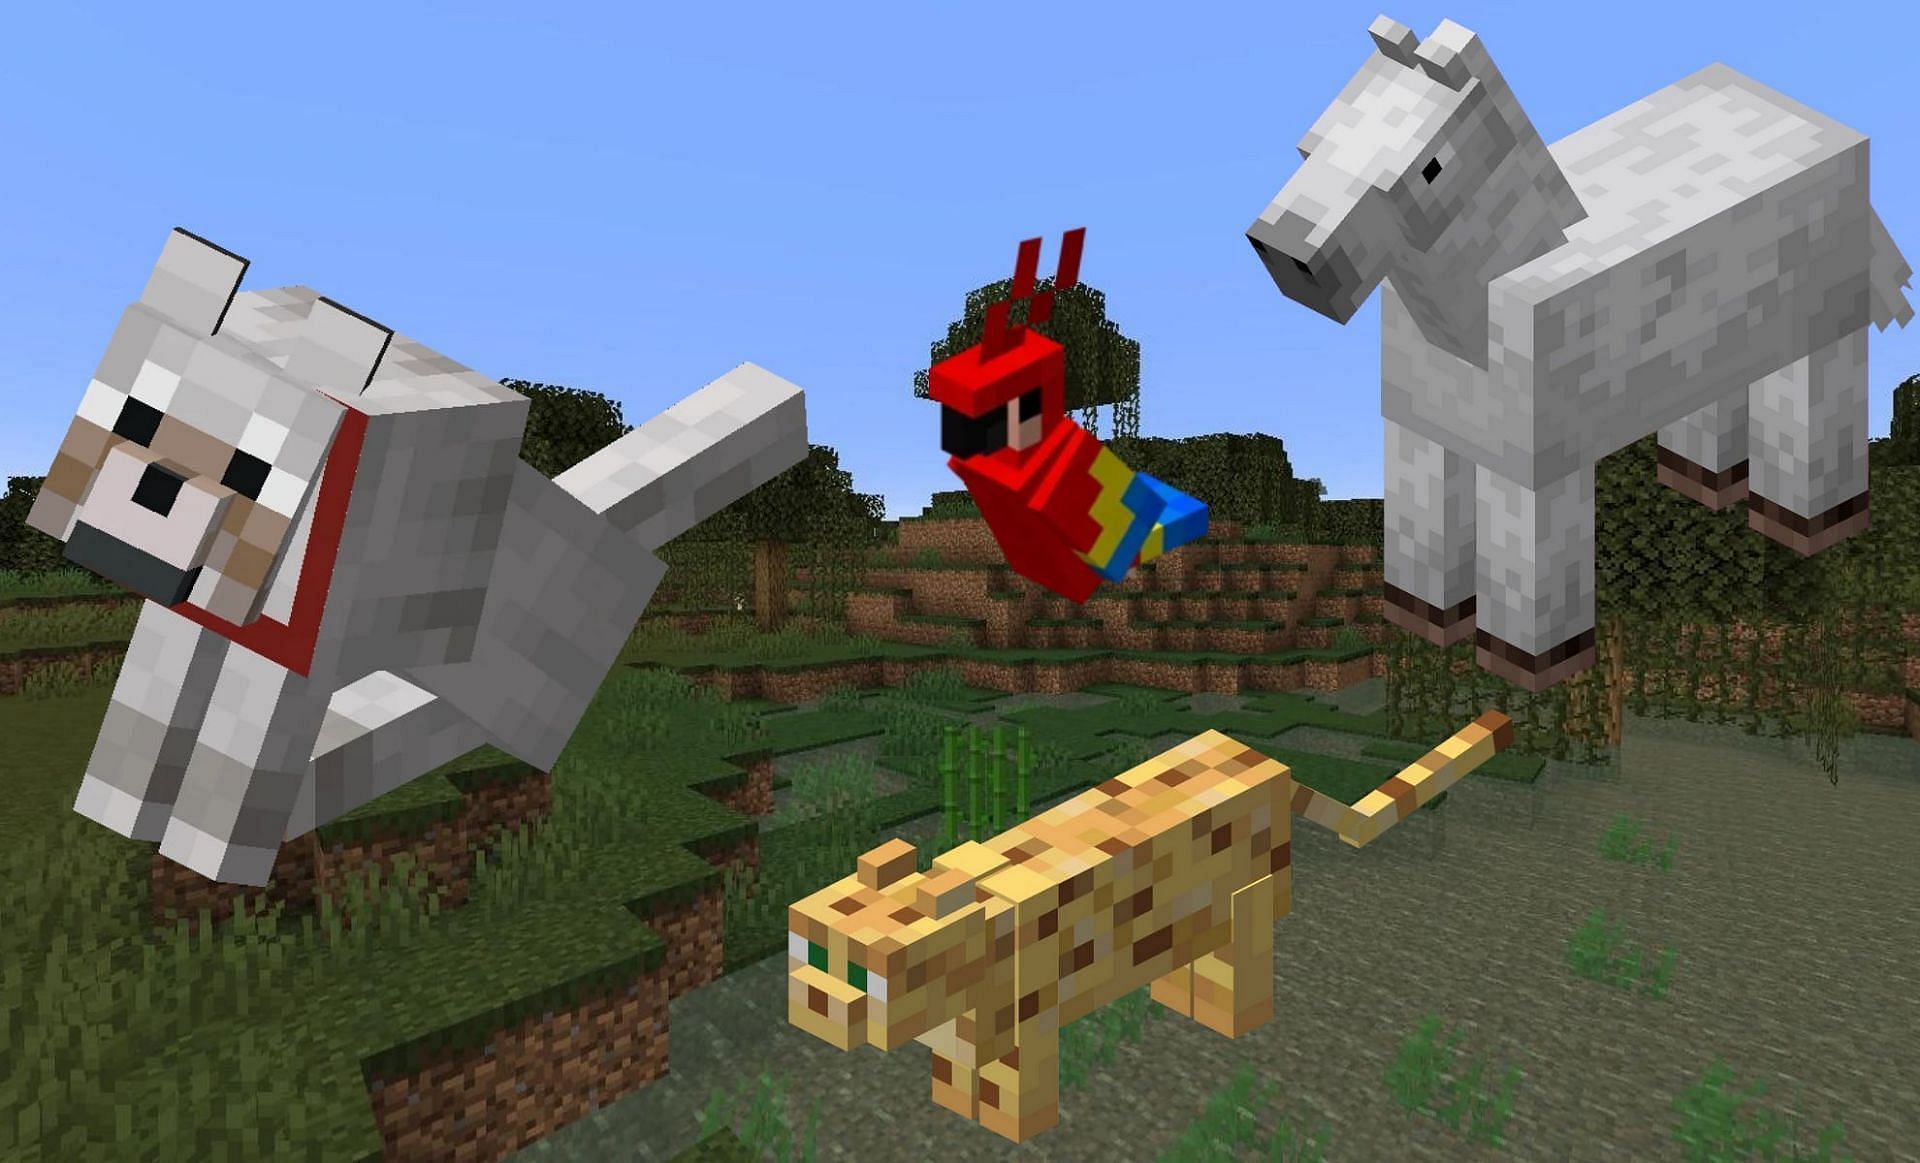 Full list of tameable mobs in Minecraft (2022)